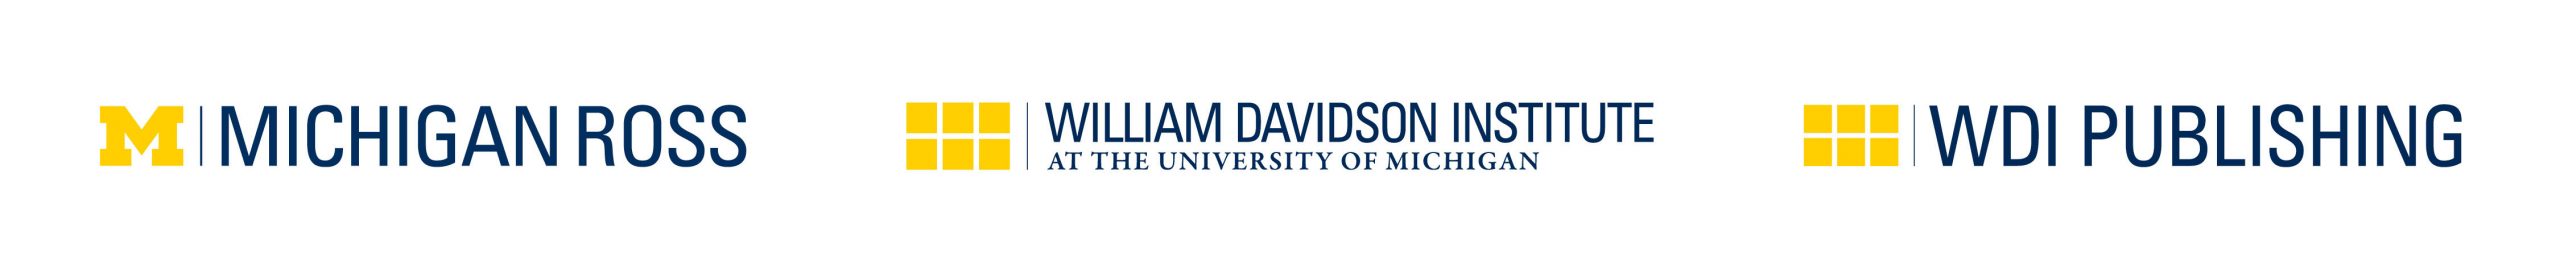 Sponsor logos for the DEI Case Competition: Michigan Ross, William Davidson Institute and WDI Publishing